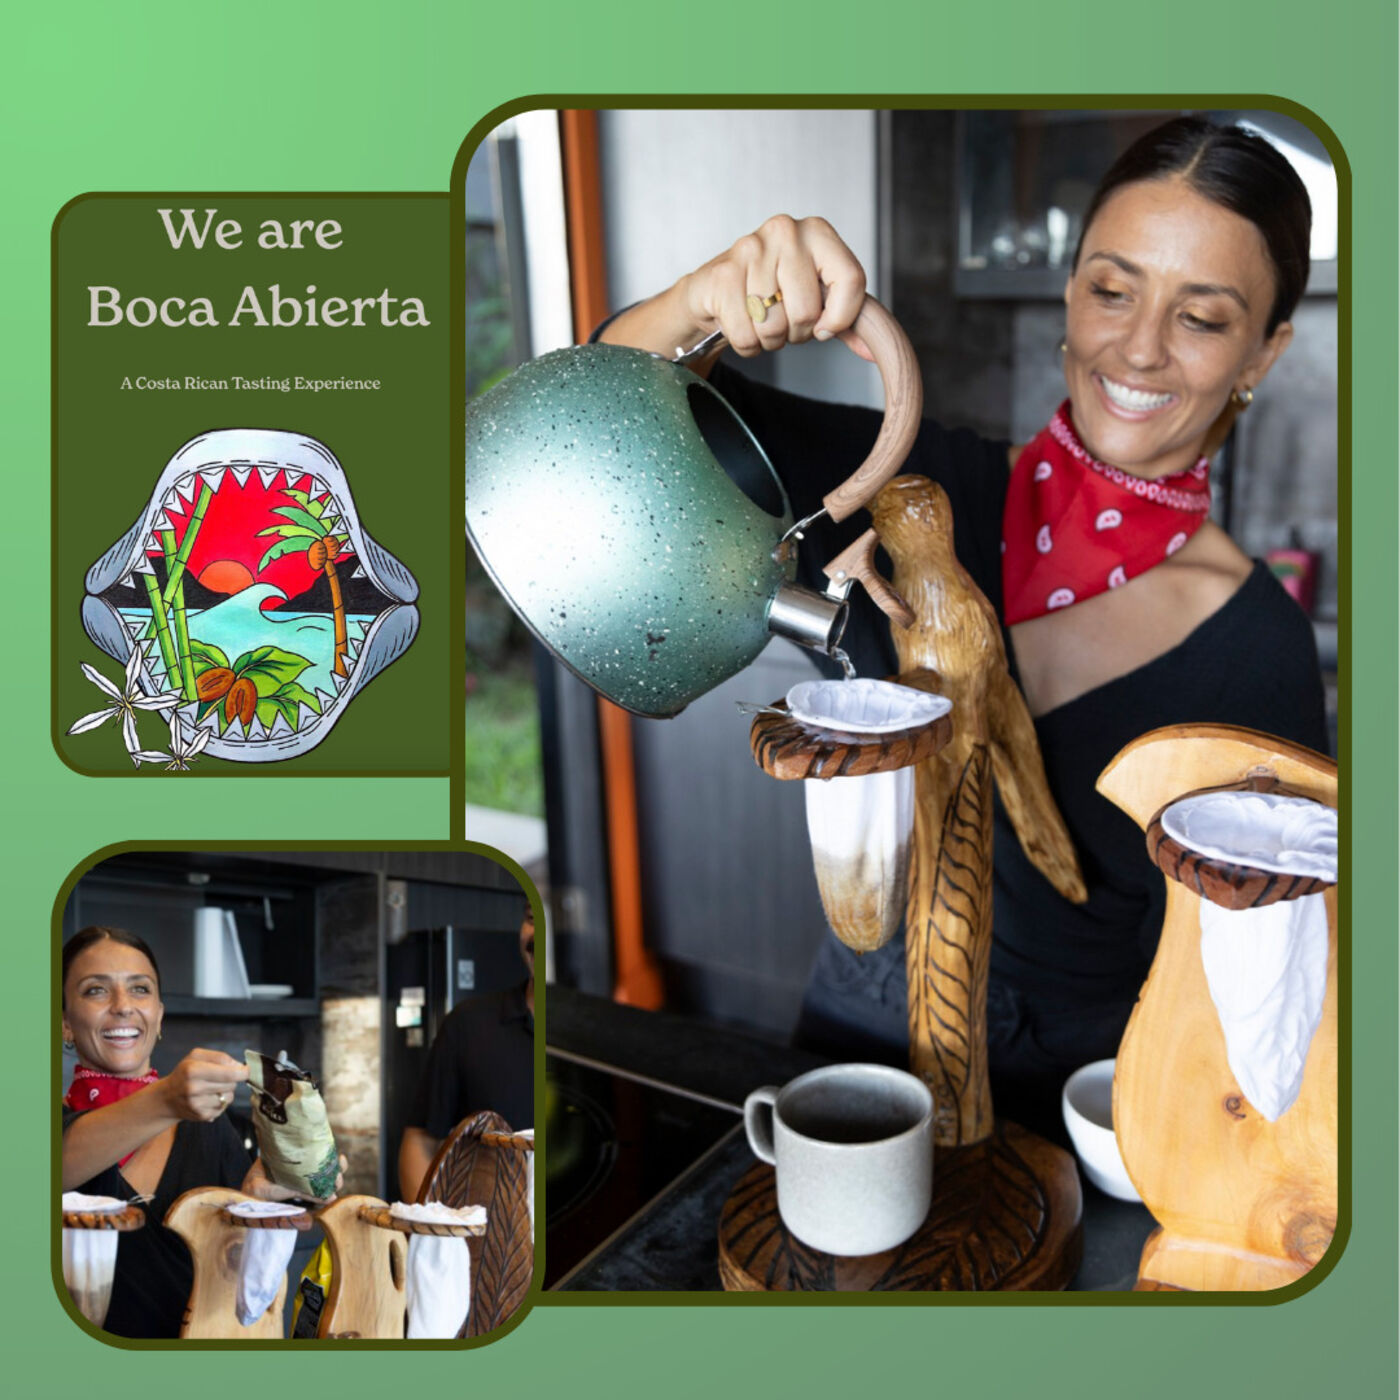 From Bean to Business: Building Boca Abierta